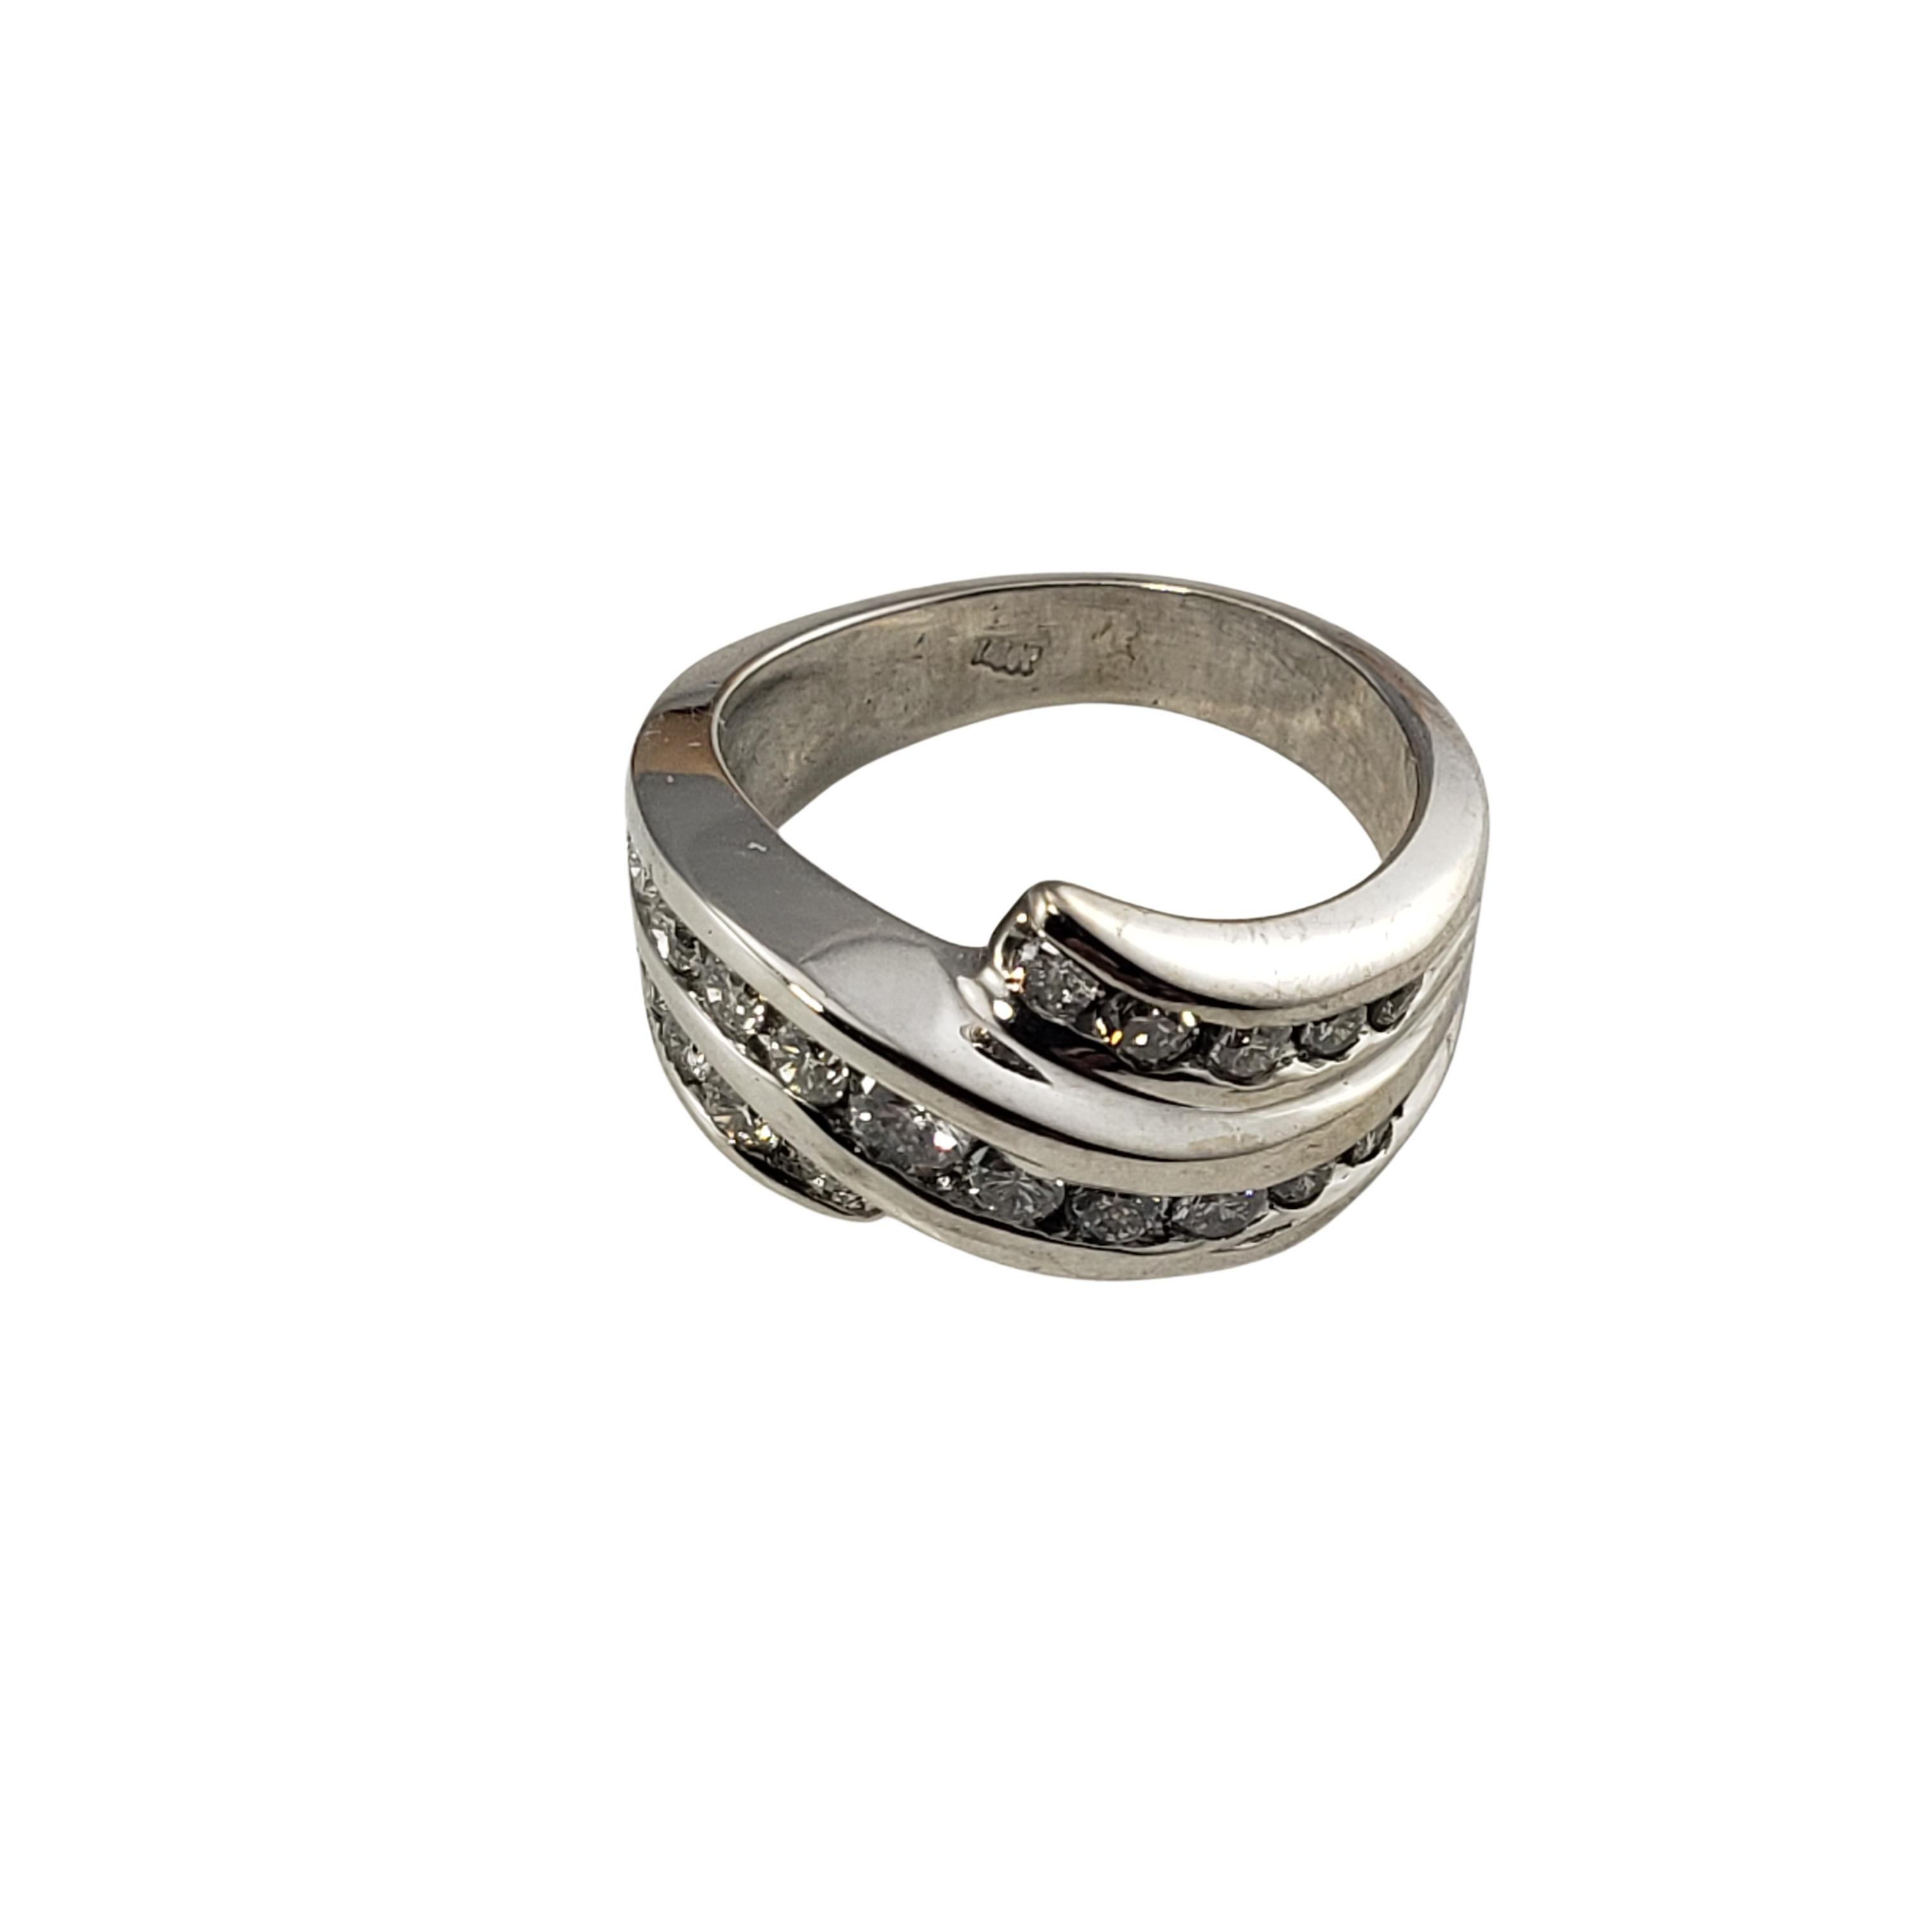 14 Karat White Gold and Diamond Ring Size 5.75-

This sparkling ring features 21 round brilliant cut diamonds set in beautifully detailed 14K white gold.  Width:  11 mm.  Shank: 4 mm.

Ring Size:  5.75

Weight:  4.6 dwt. /  7.2 gr.

Stamped: 